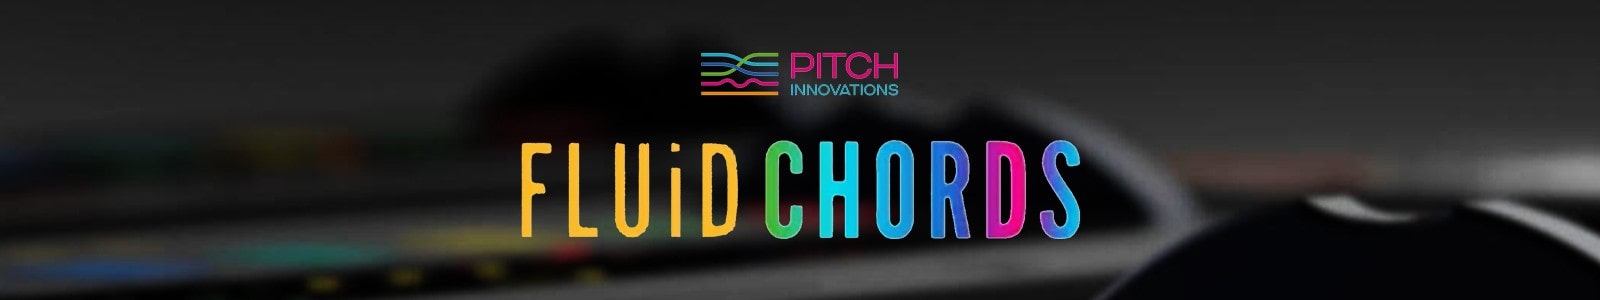 Fluid Chords by Pitch Innovations